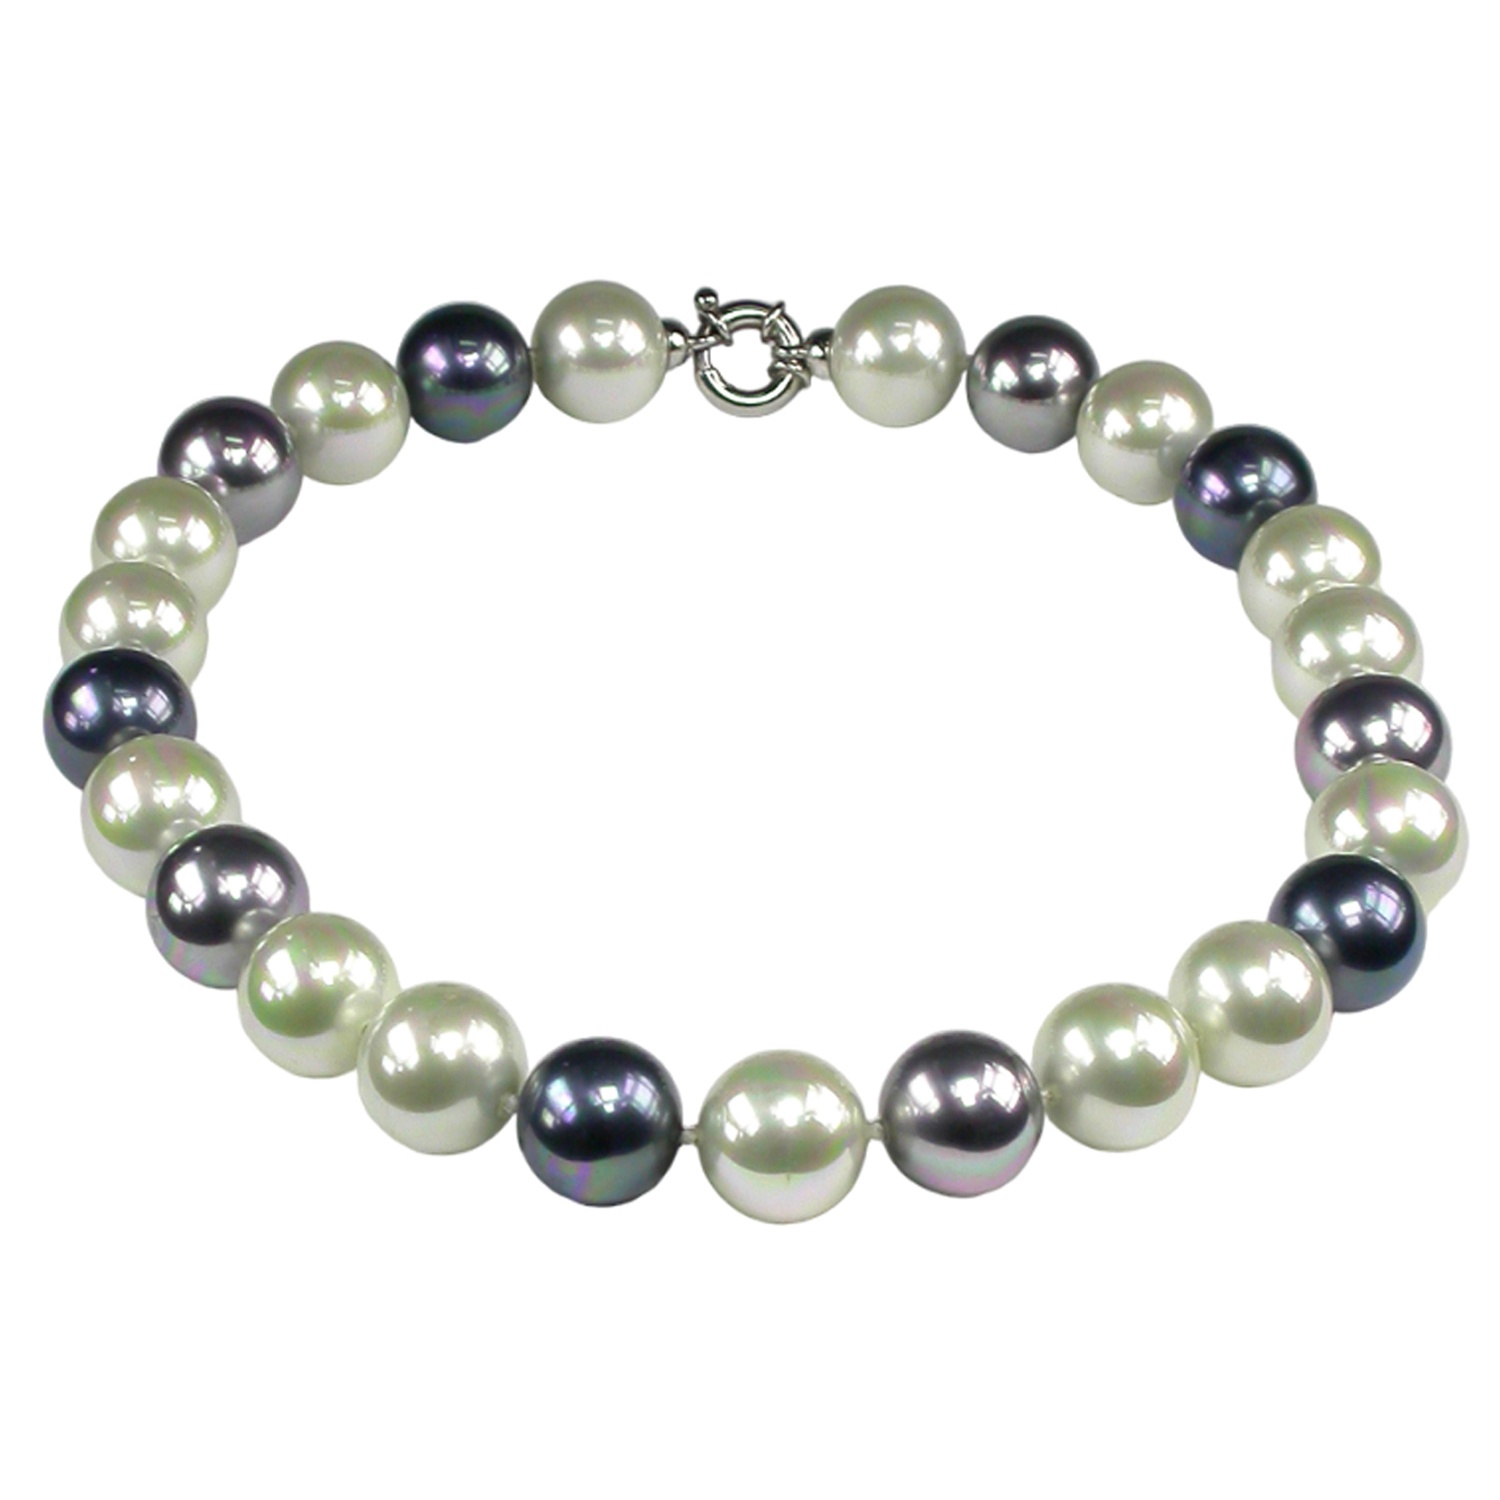 Classic white, grey and black Pearl Necklace.